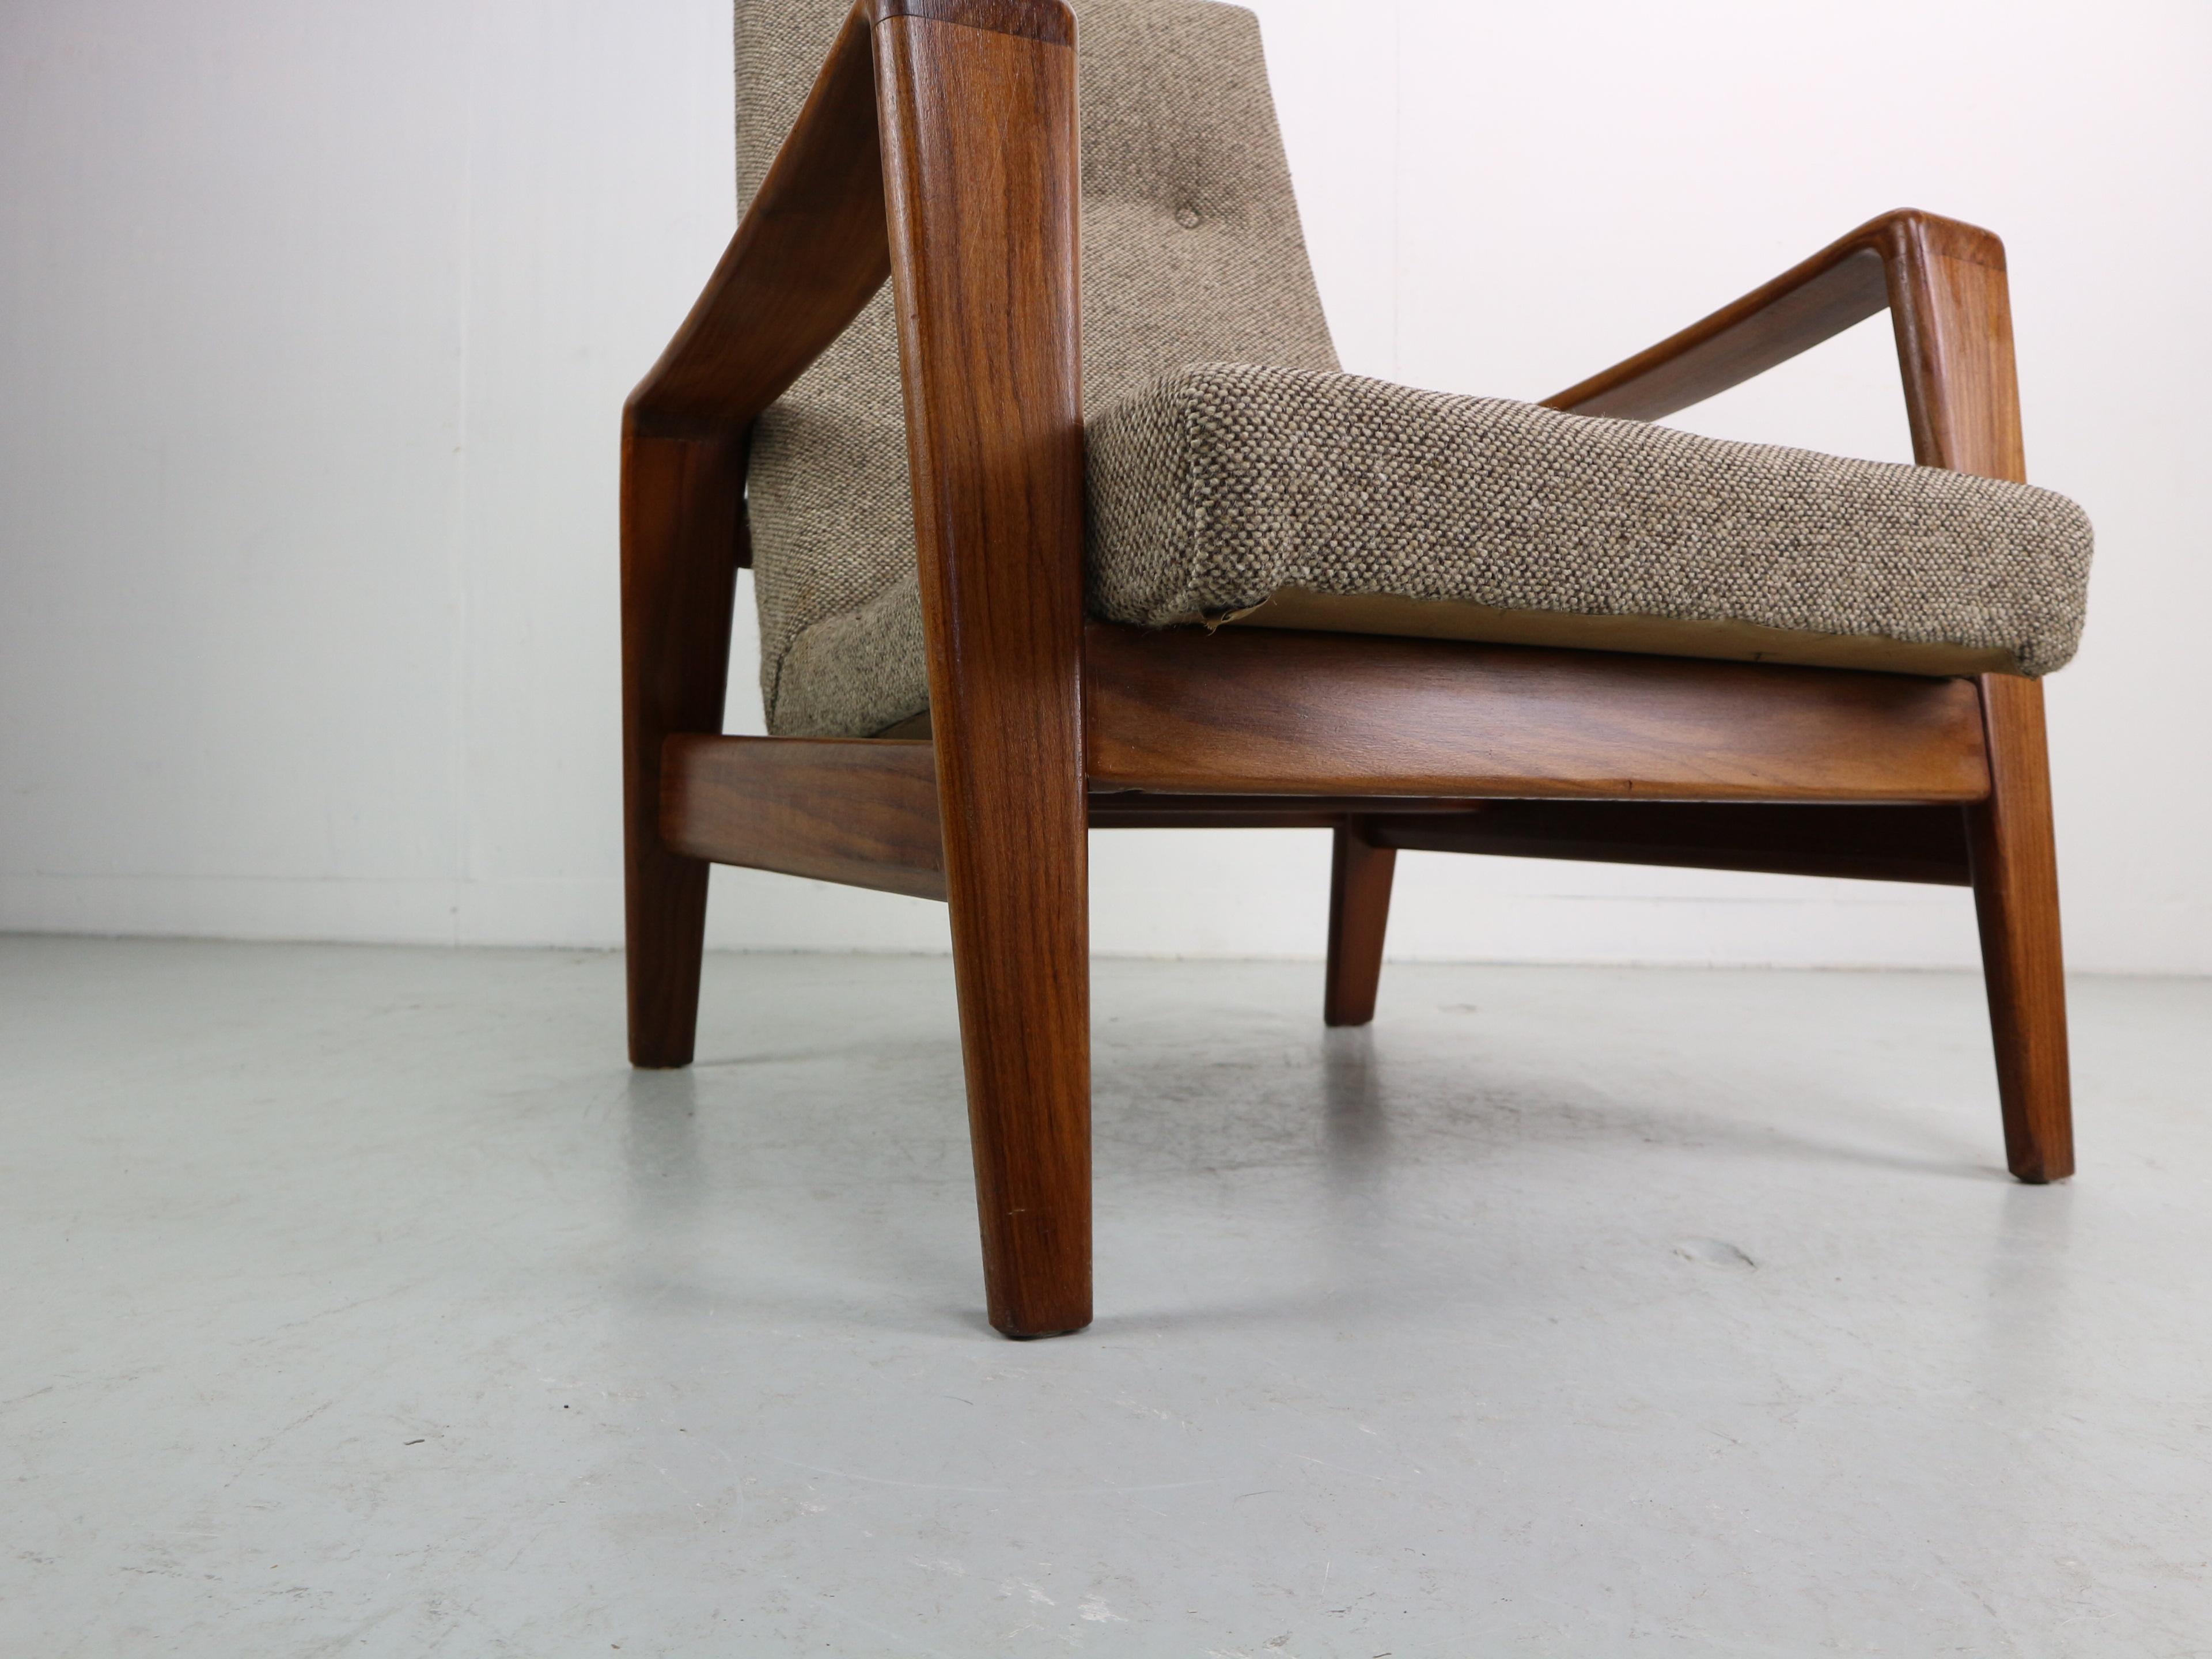 Lounge Chair by Arne Wahl Iversen for Komfort, 1960s For Sale 5